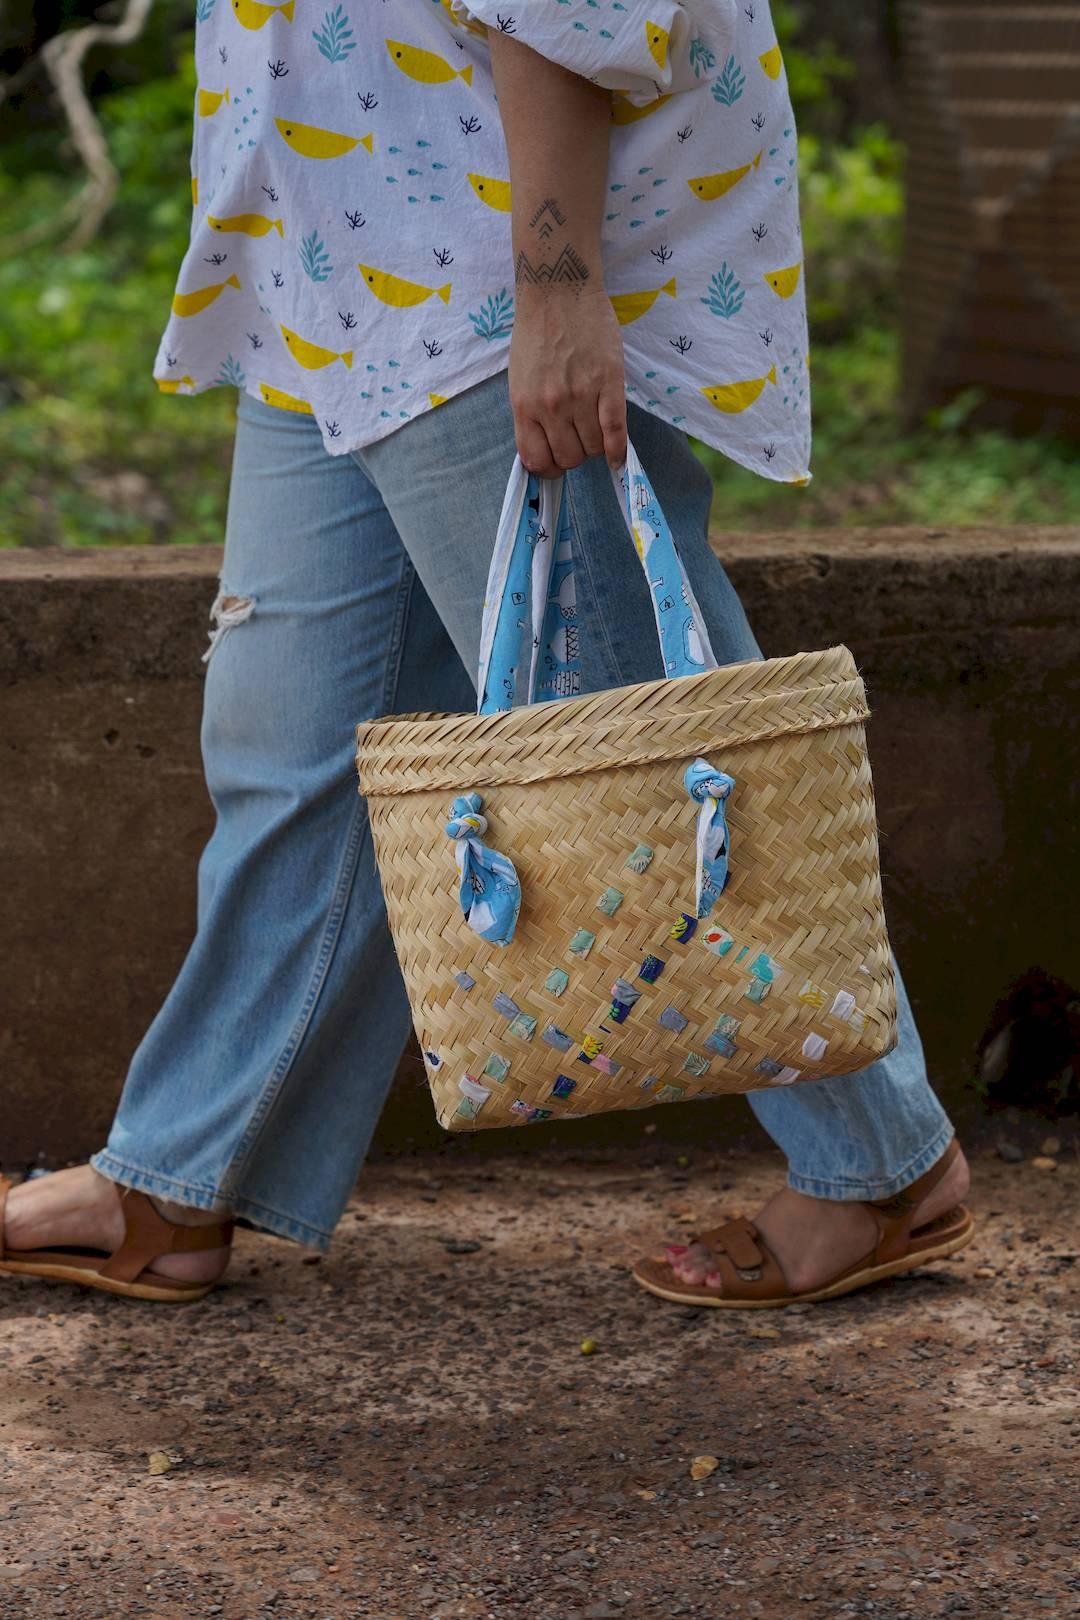 Eco friendly, artisanal small-batch woven bamboo bags from Goa online